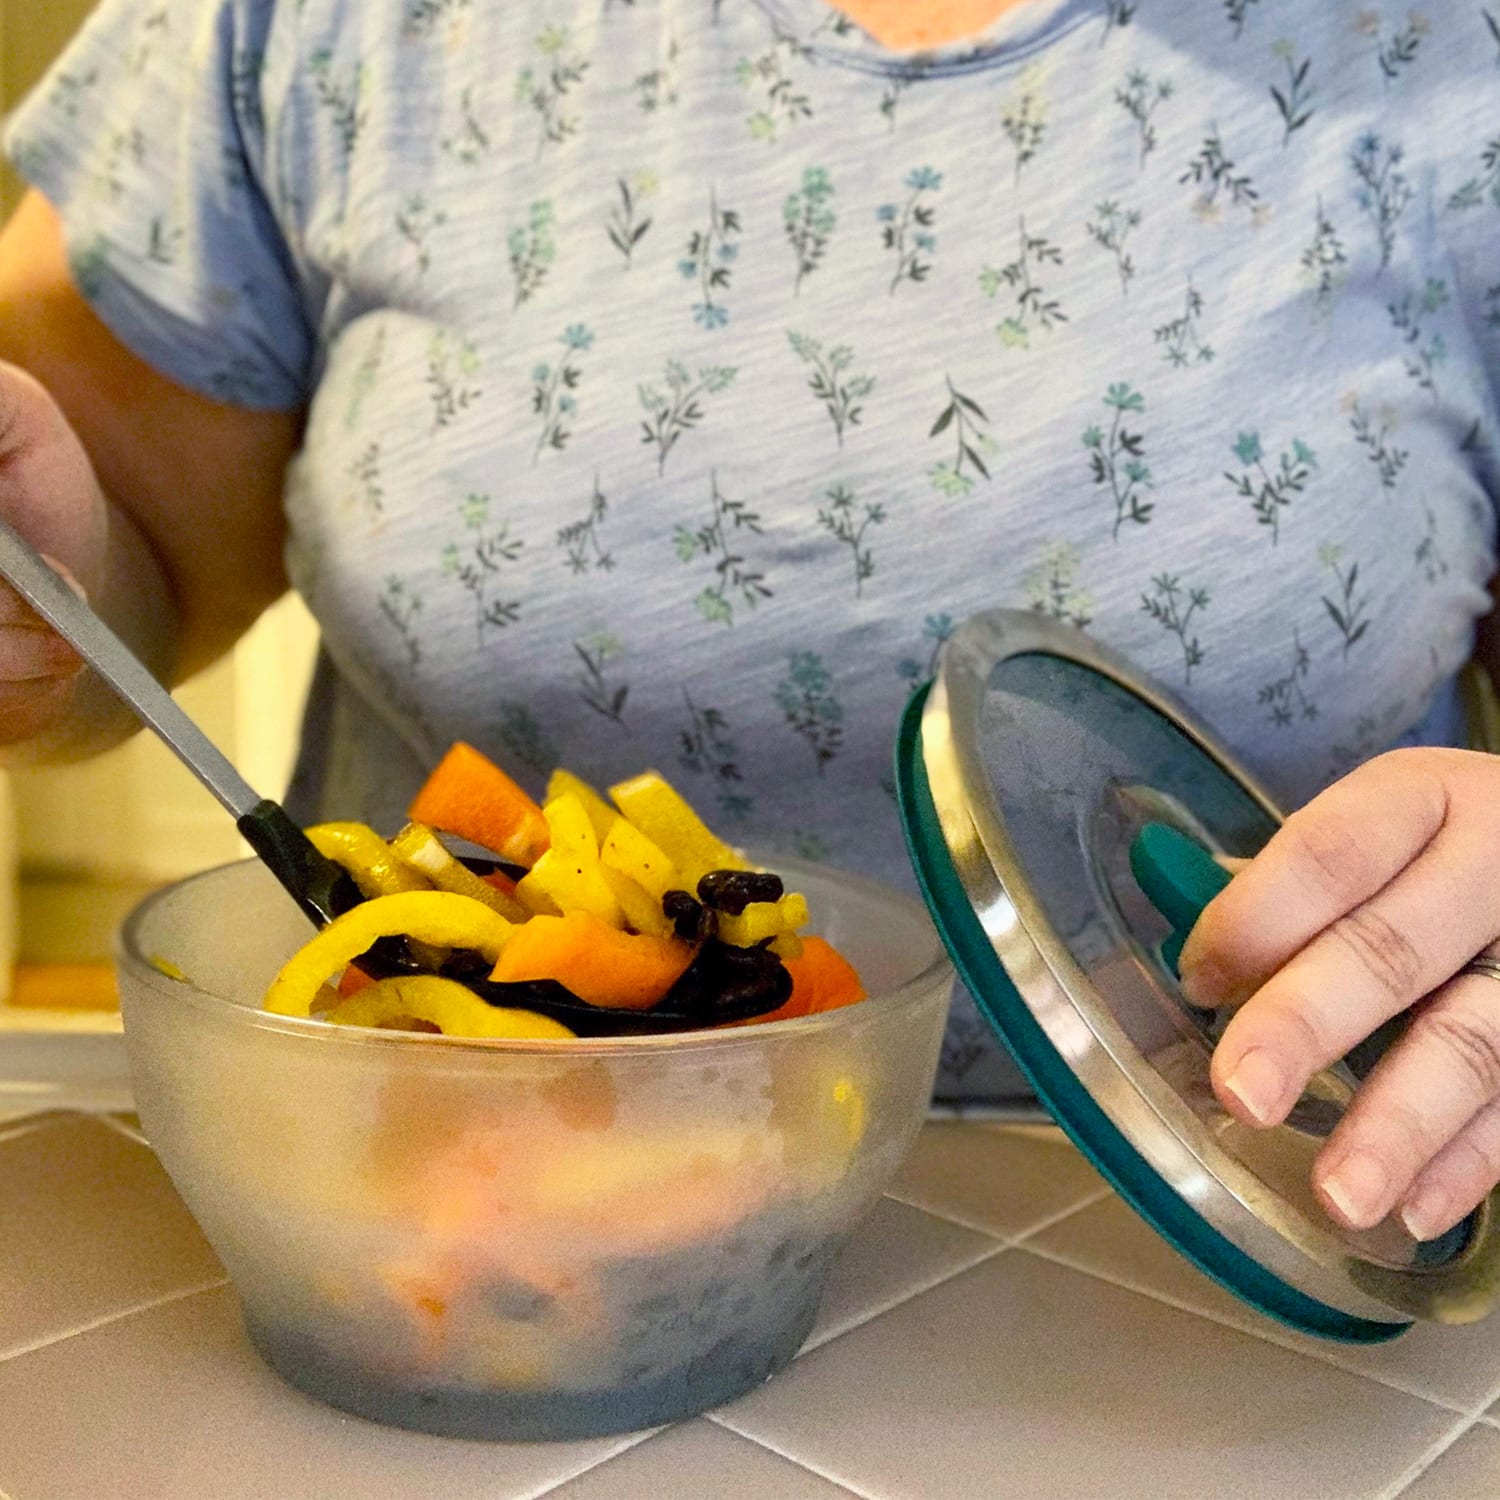 I Tested Anyday's Microwave Cookware Set—Here's What I Learned